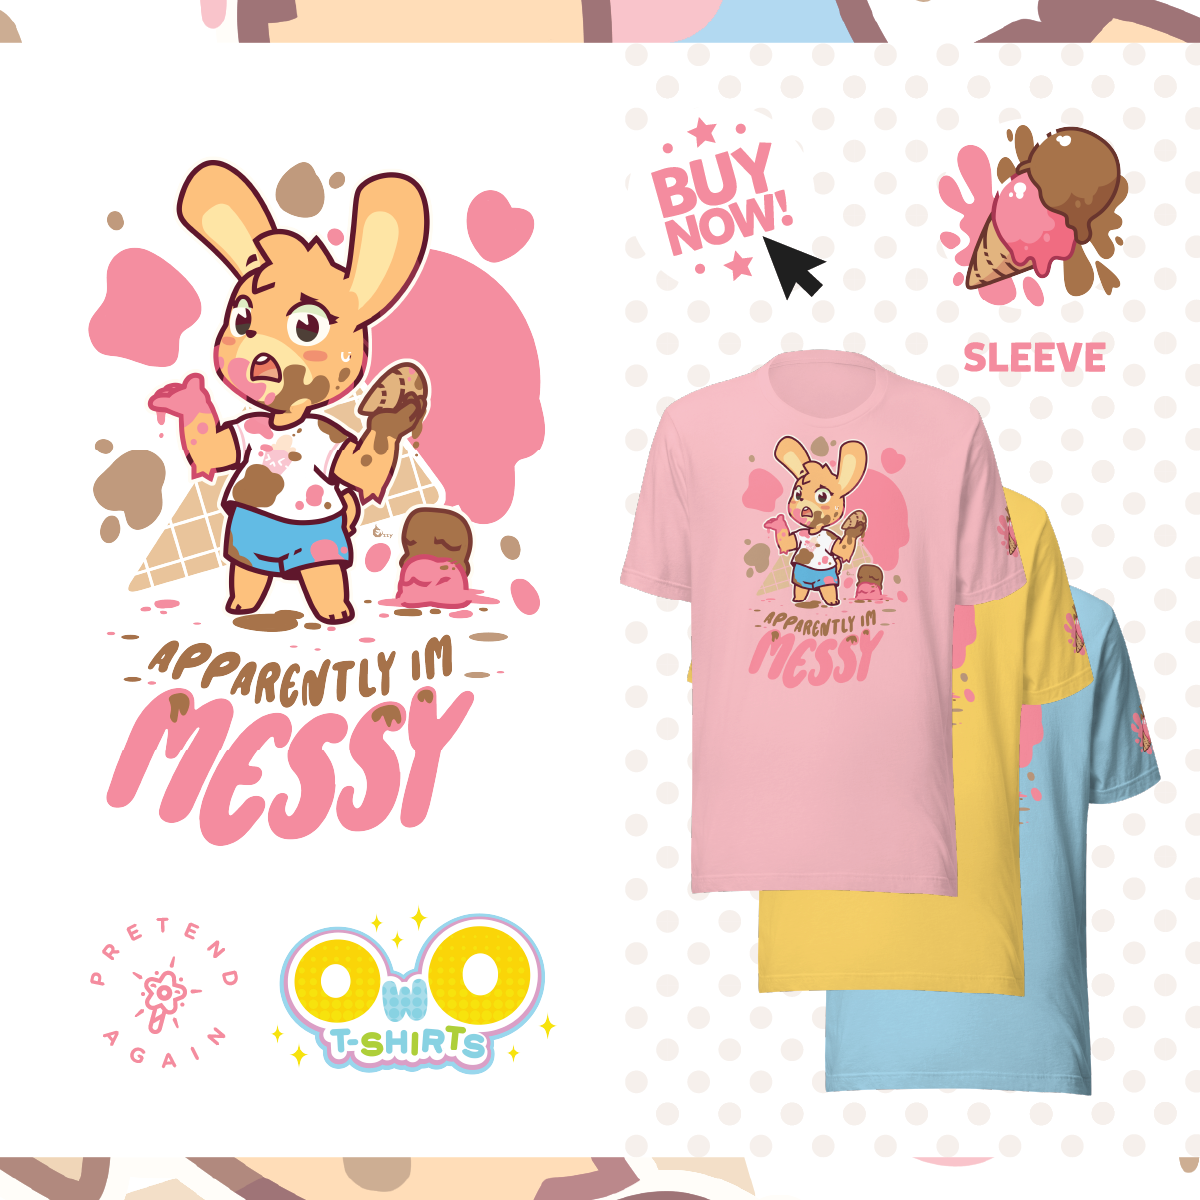 Apparently I'm Messy OwO T-shirt